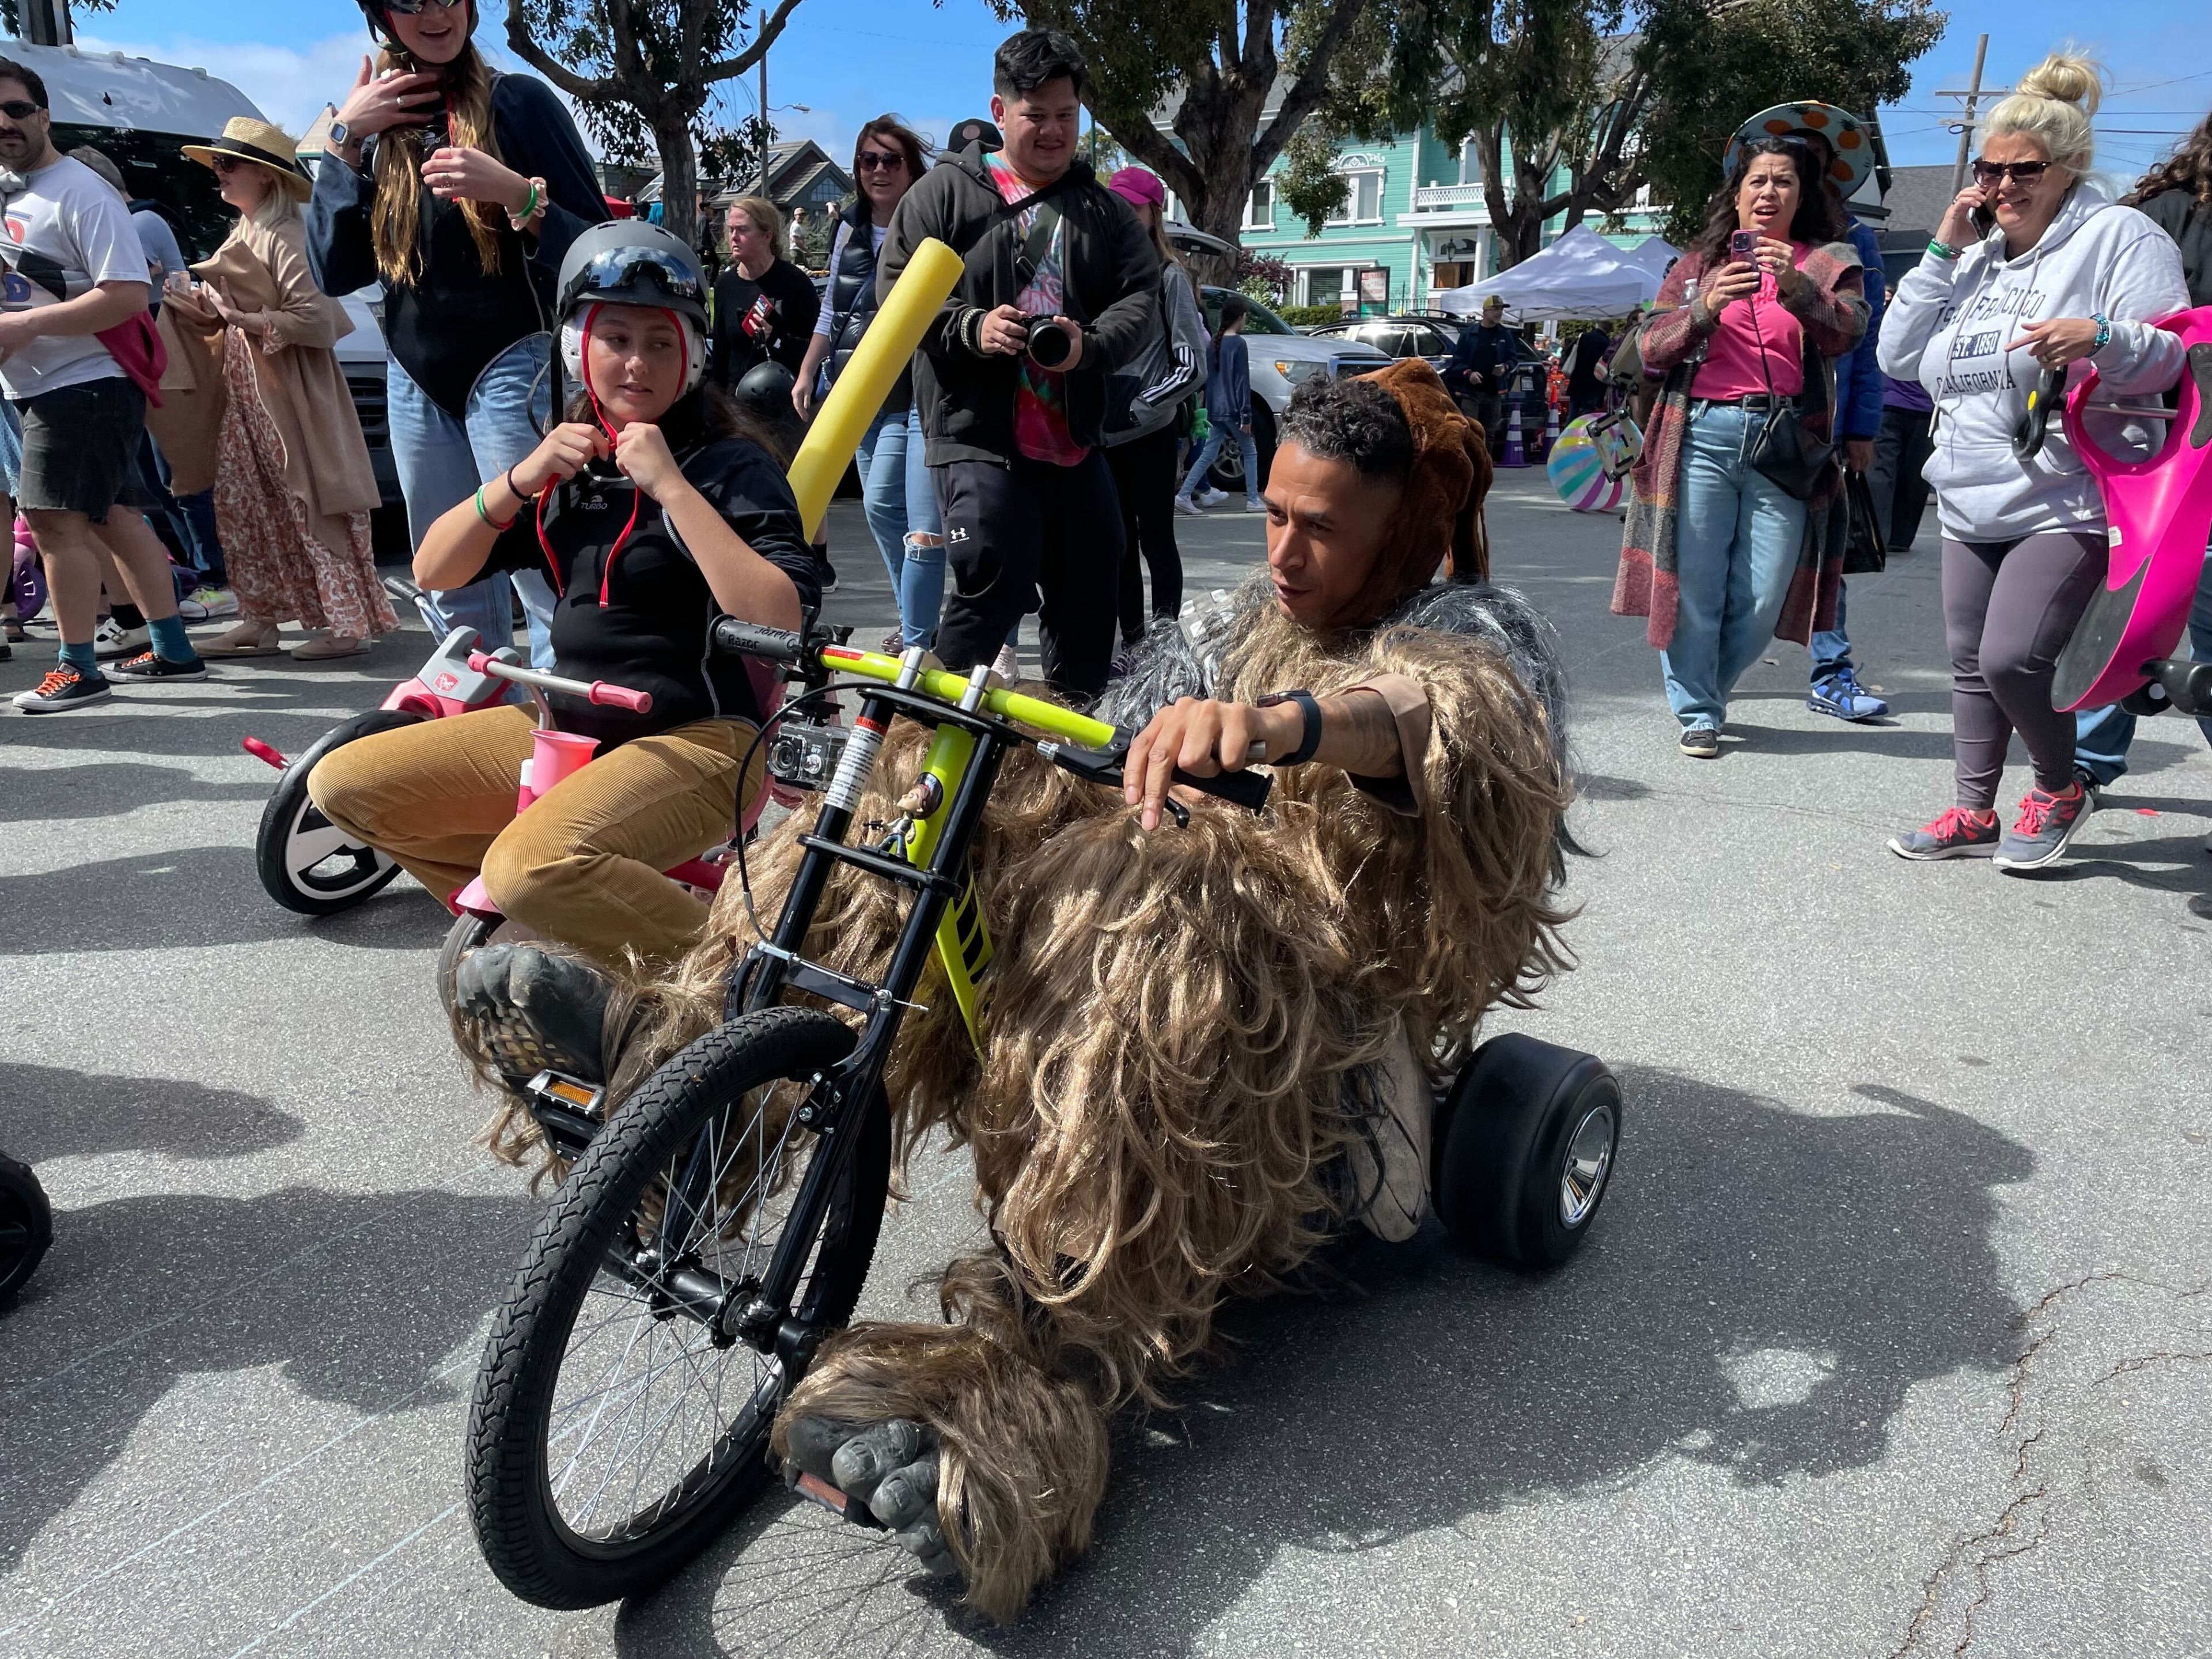 A person in a furry costume rides a tricycle with onlookers at a street event.